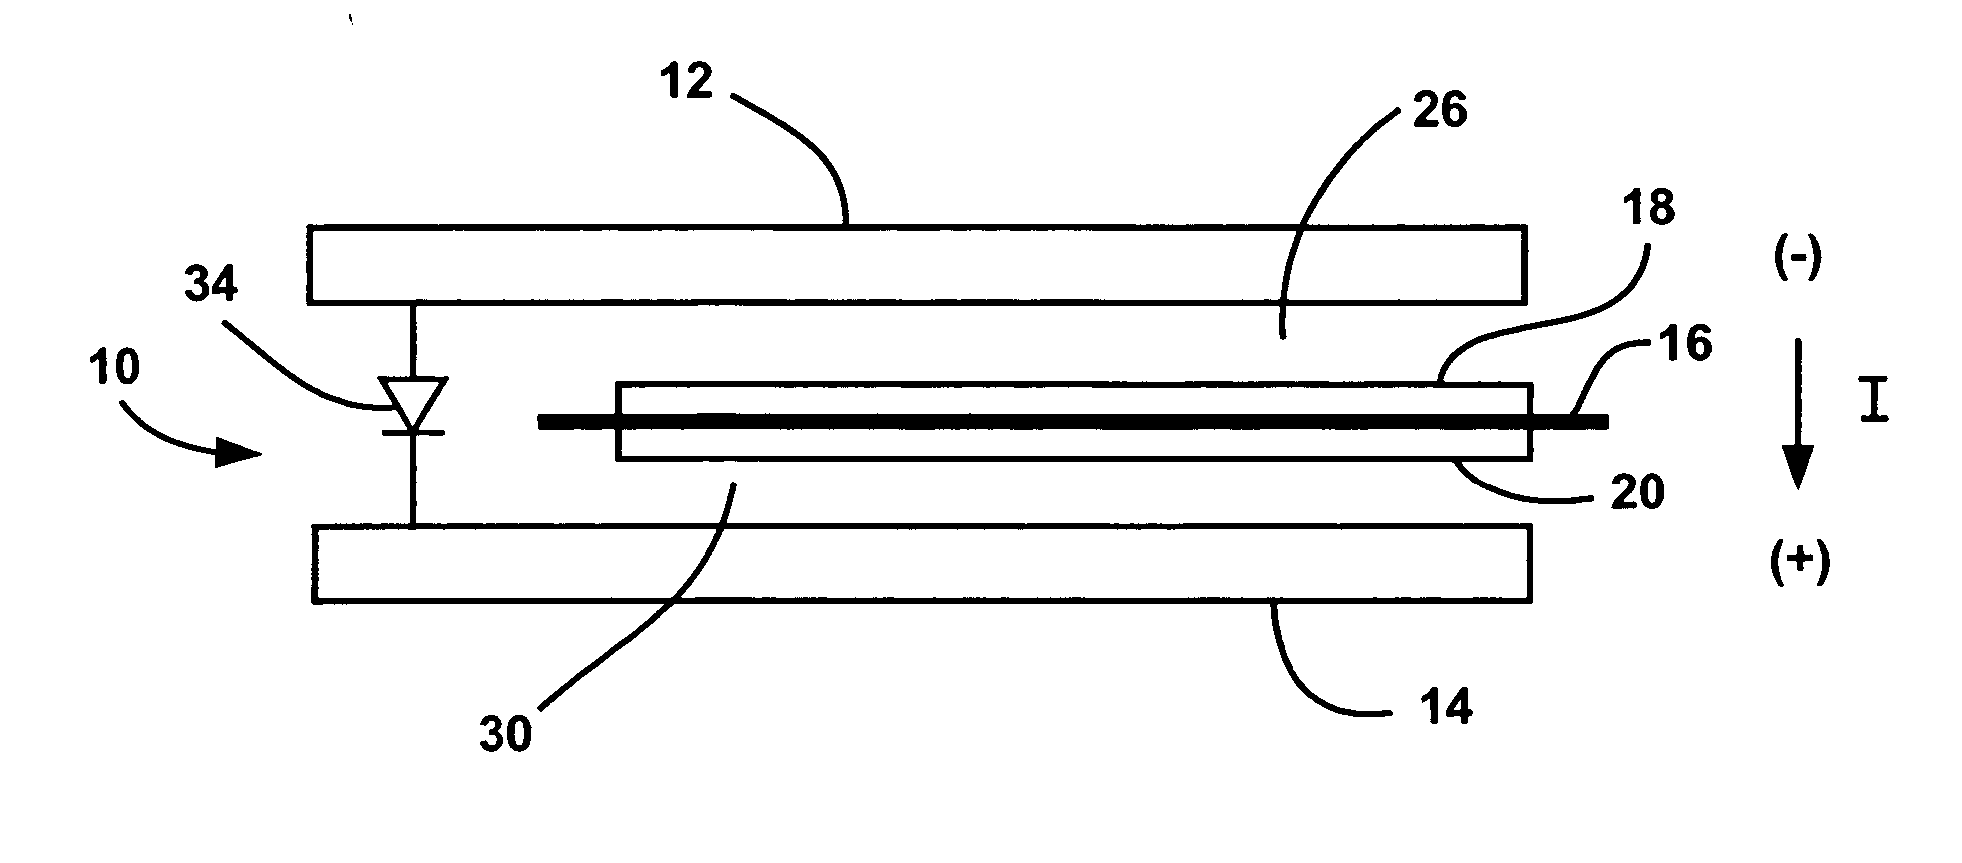 Integration of an electrical diode within a fuel cell